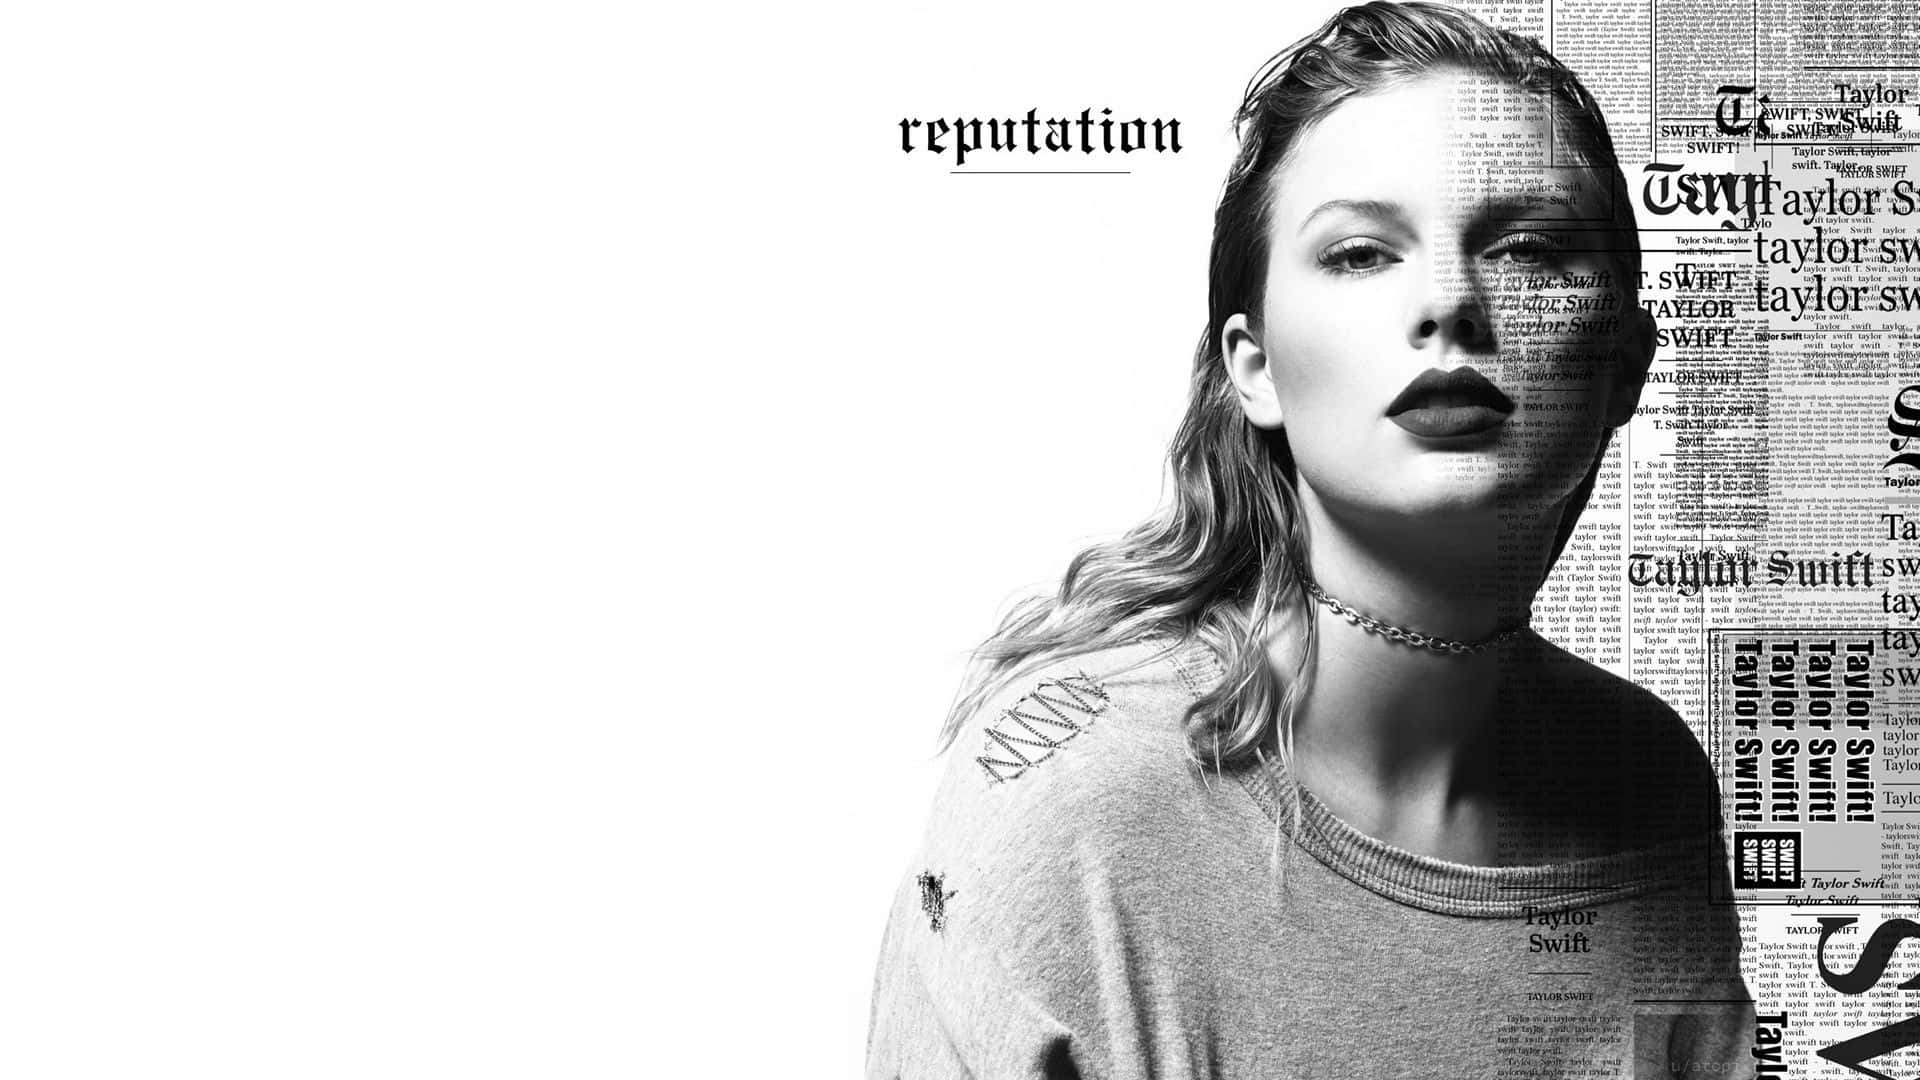 Taylor Swift Reputation Album Cover Background